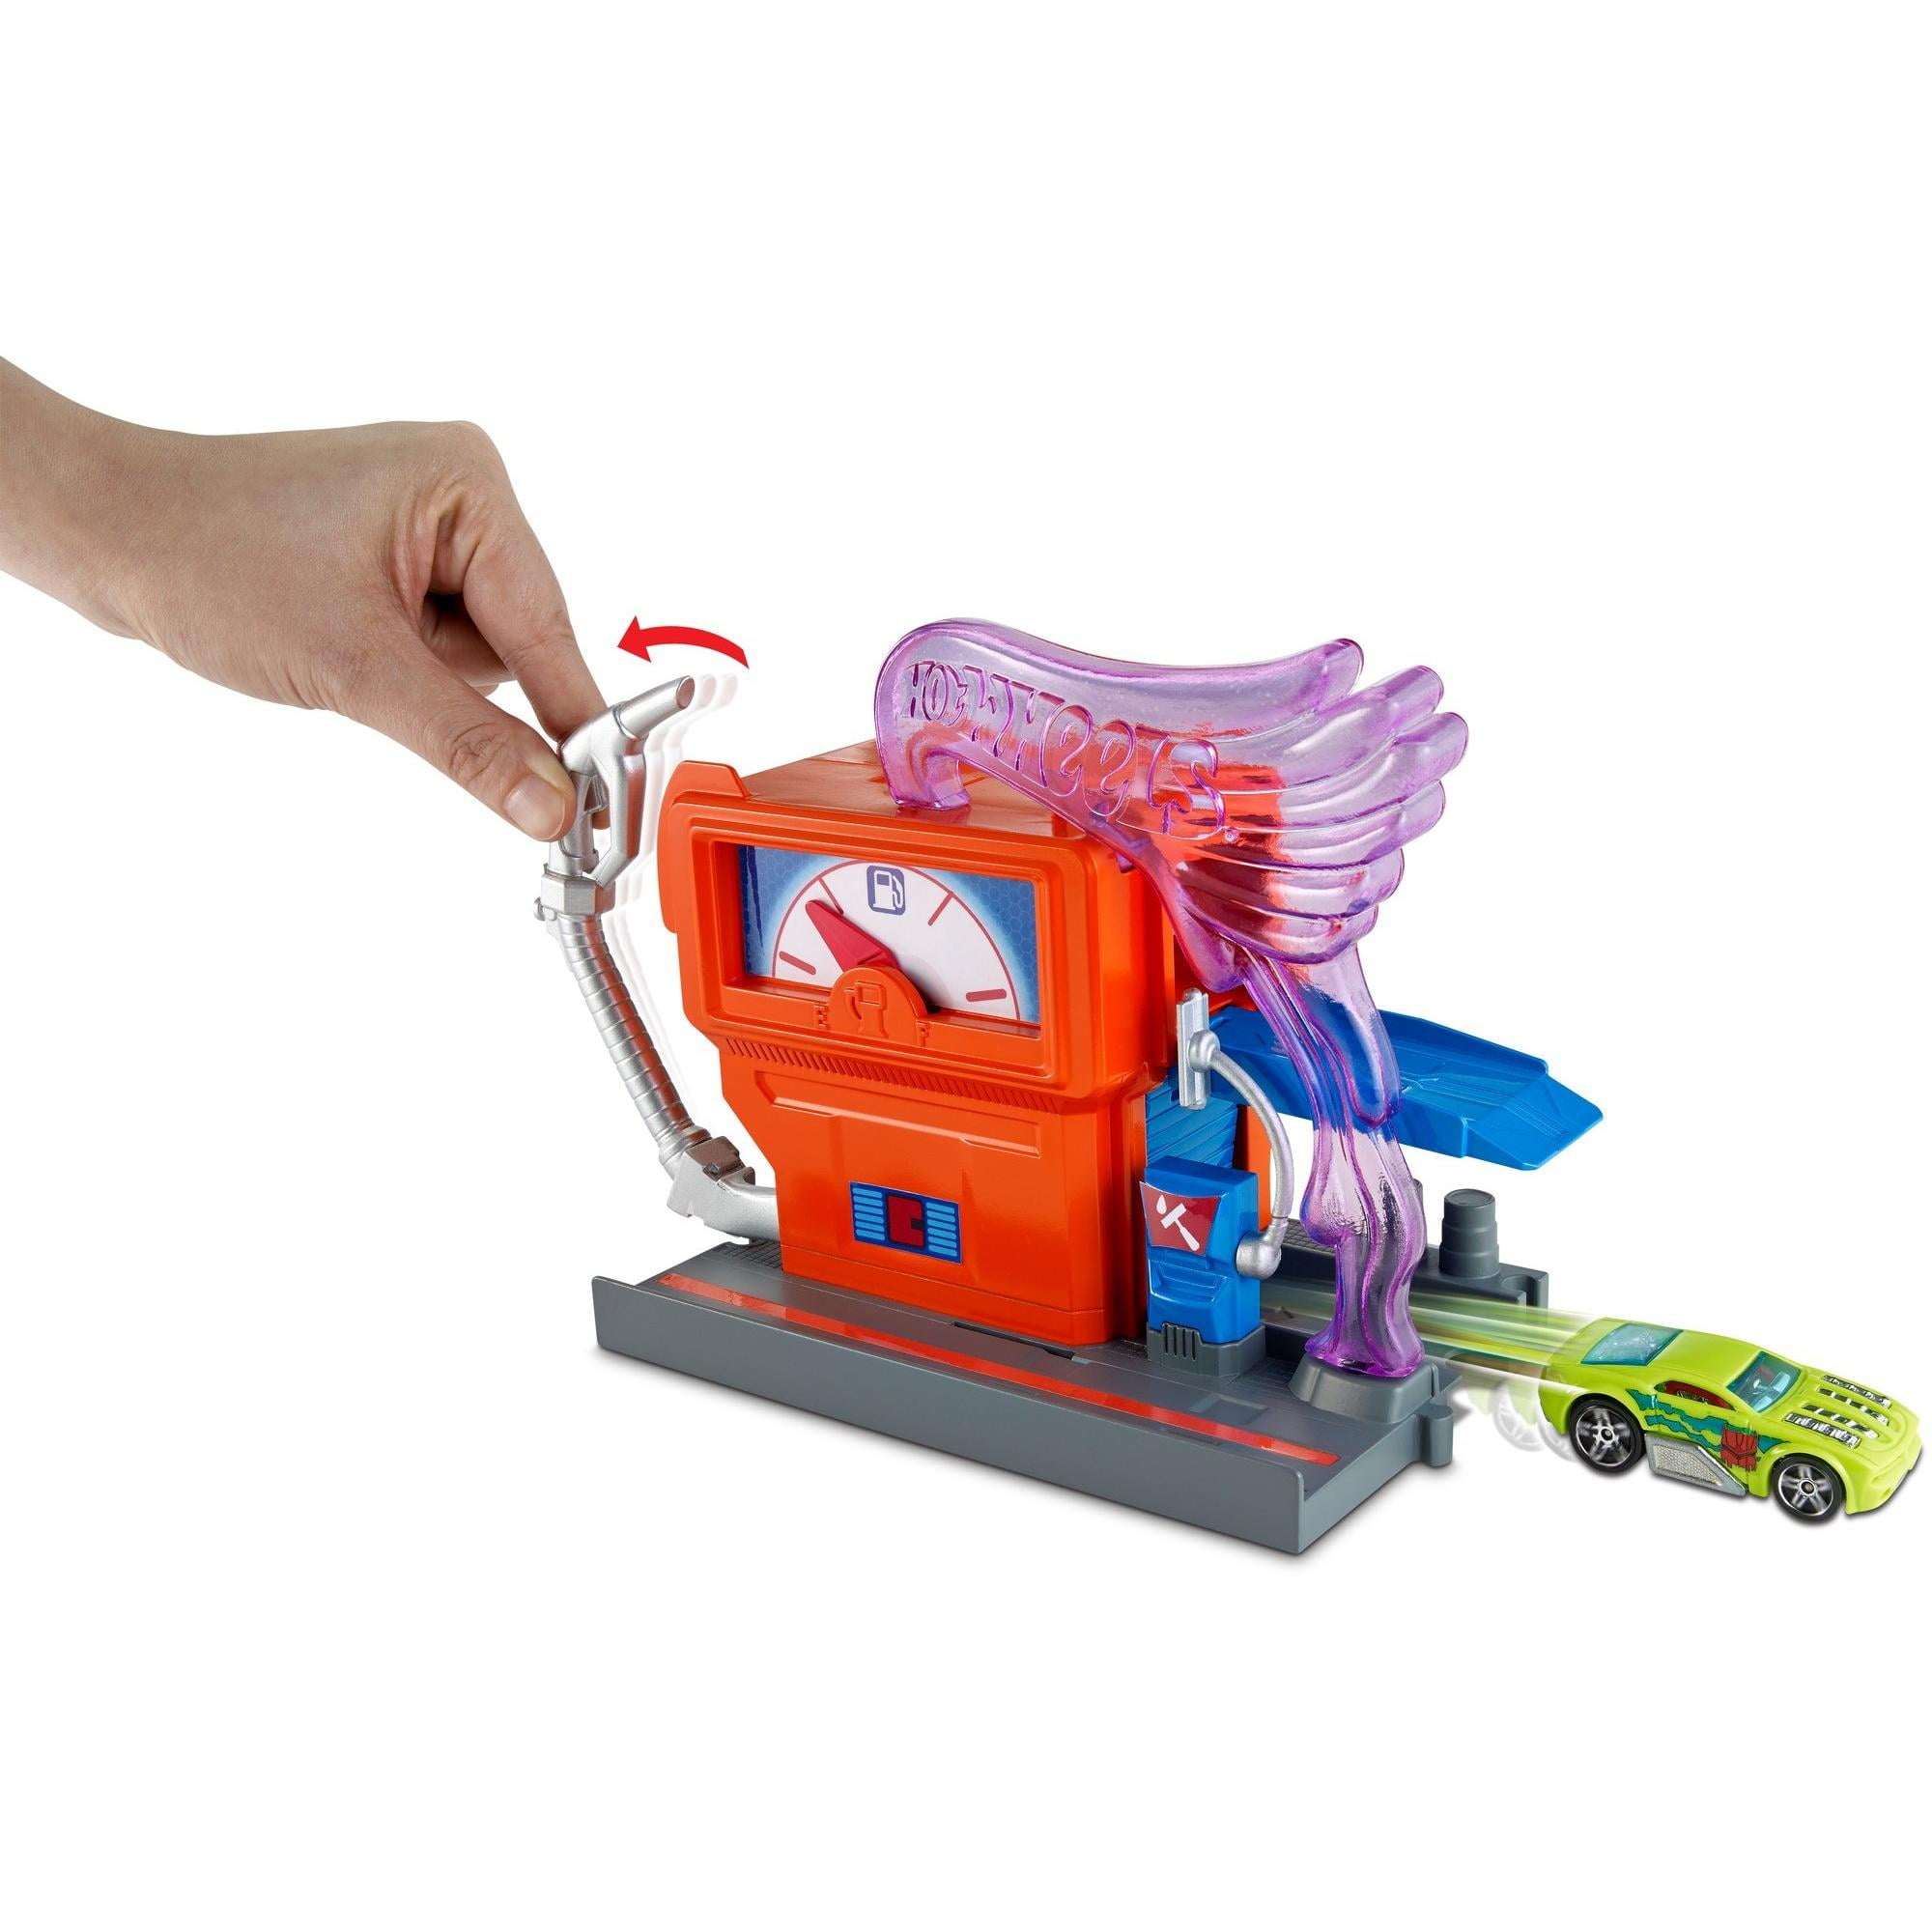 Hot Wheels Downtown Super Fuel Stop Vehiculo Playset 